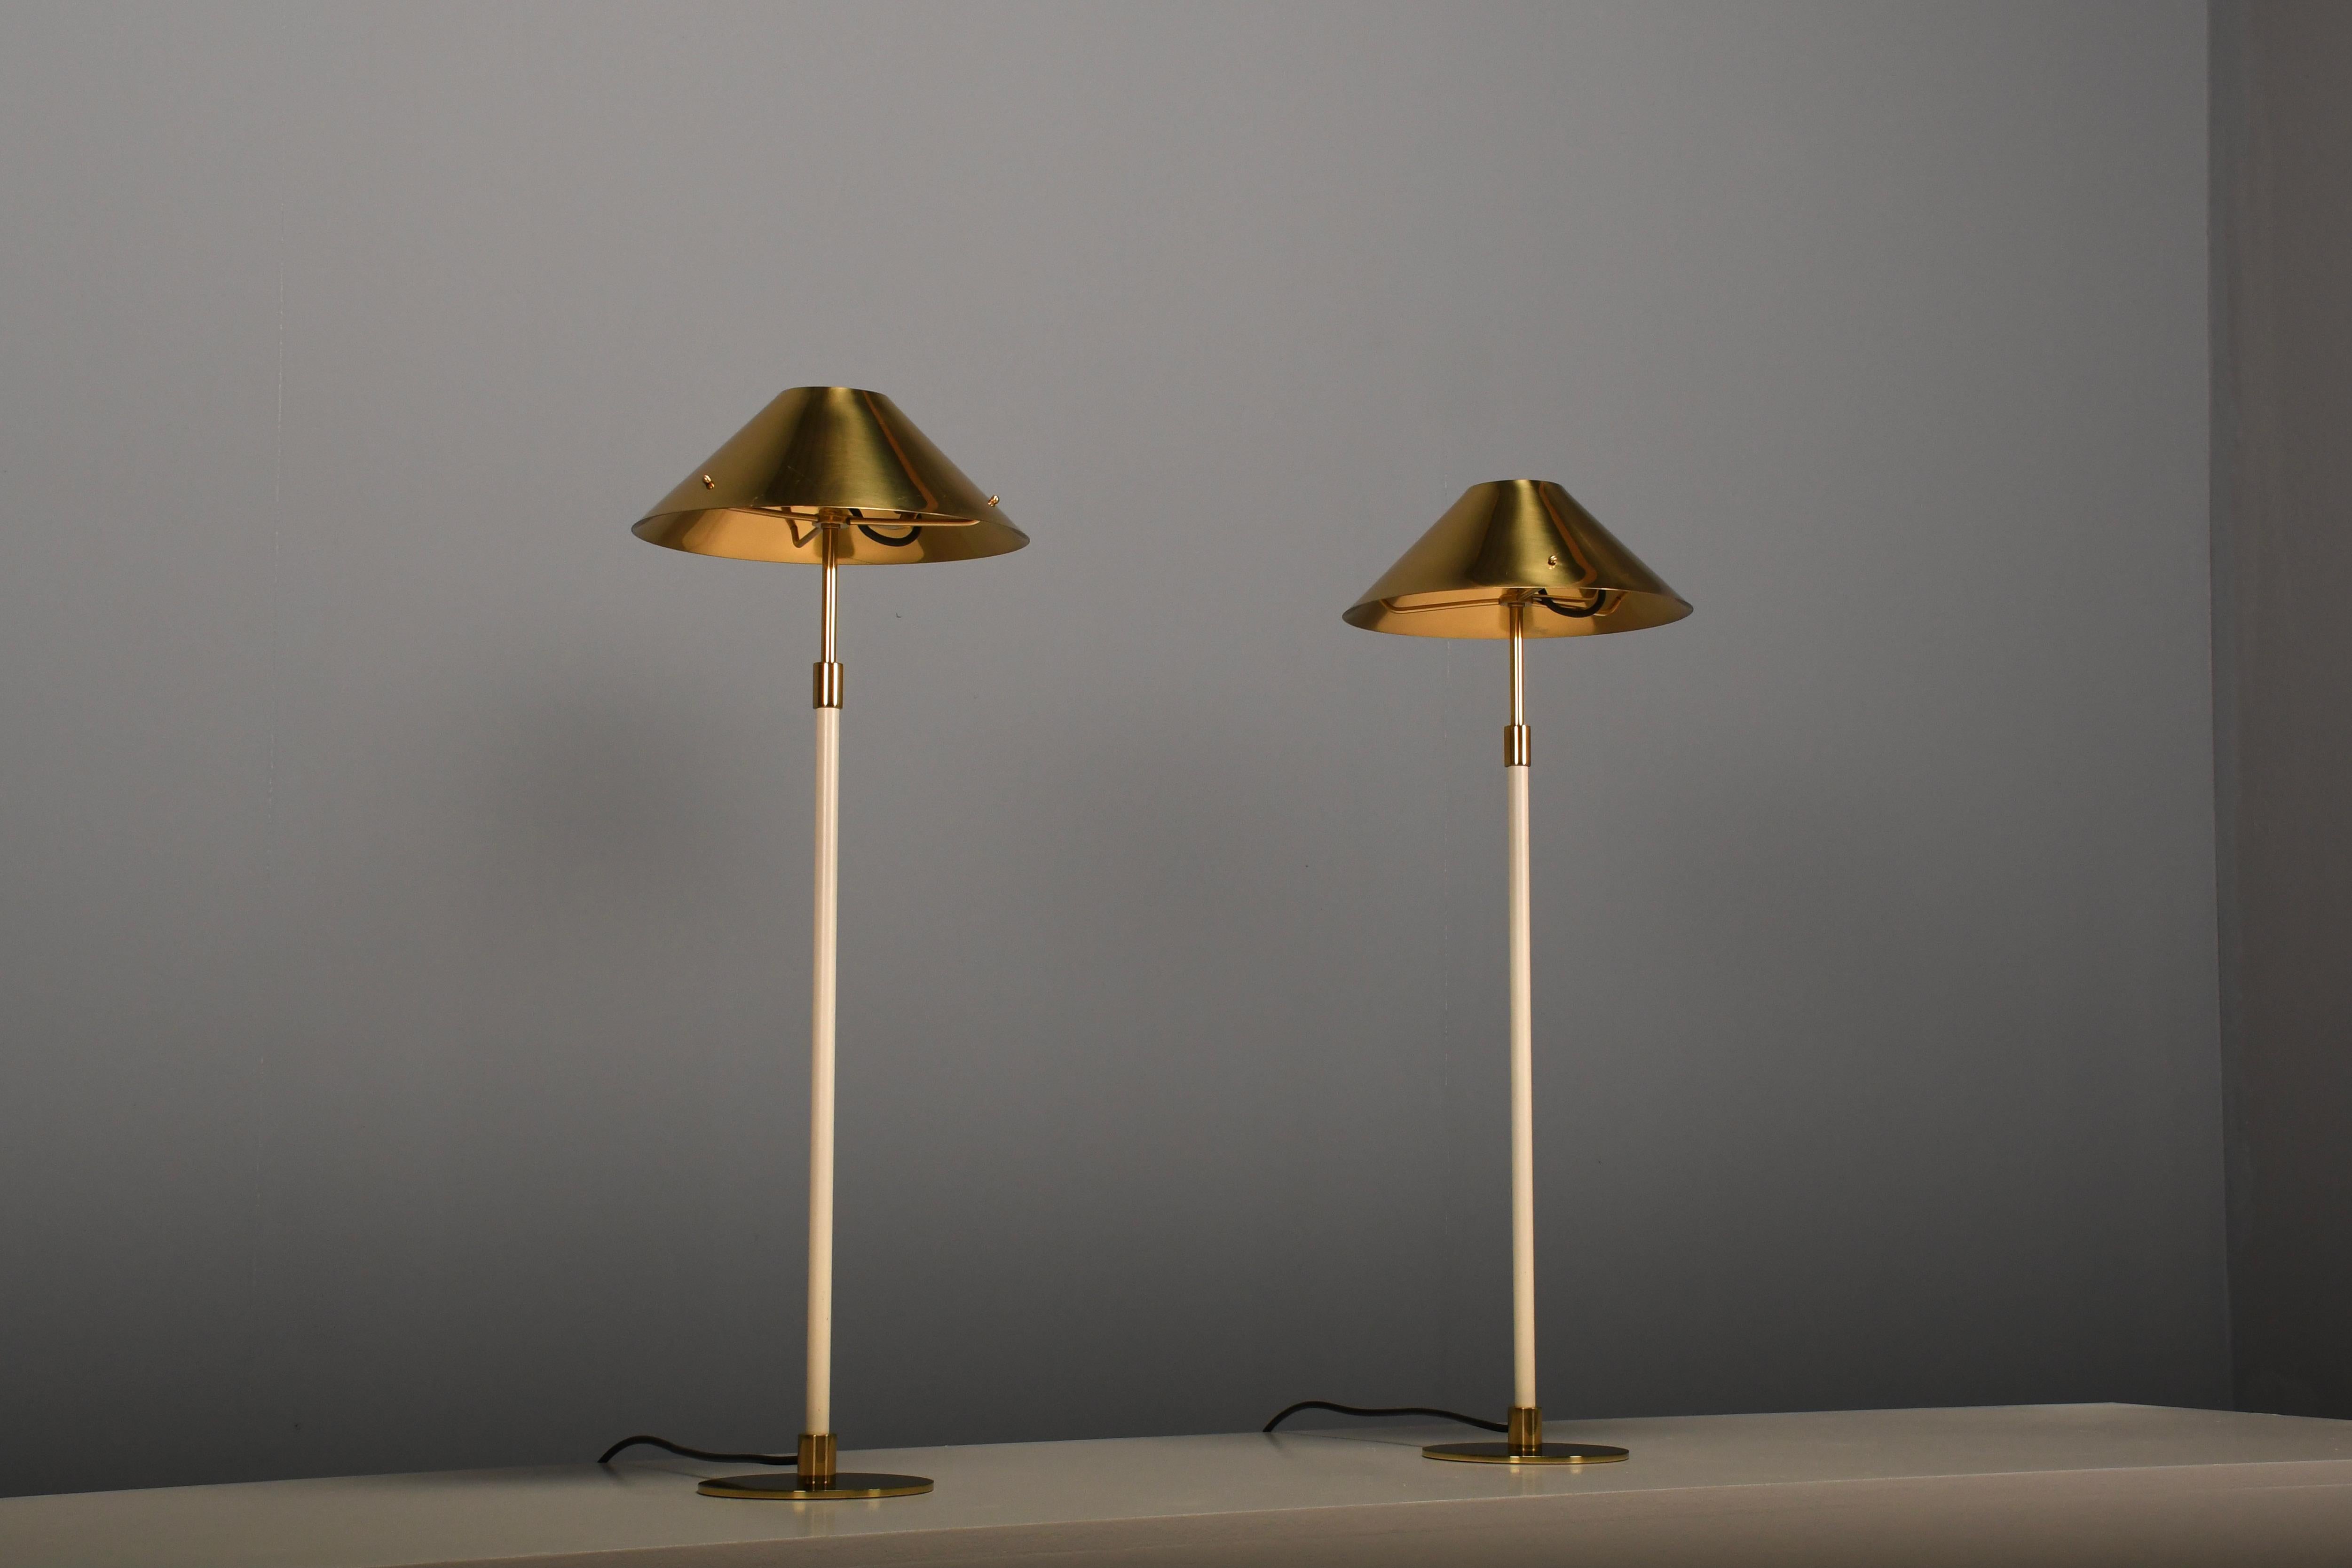 Set of beautiful table lamps in very good condition.

Designed by Mathias Thörner.

This lamps have a very elegant, Scandinavian look and they are very well made. 

The shades are made of thick solid brass and are connected to the lacquered